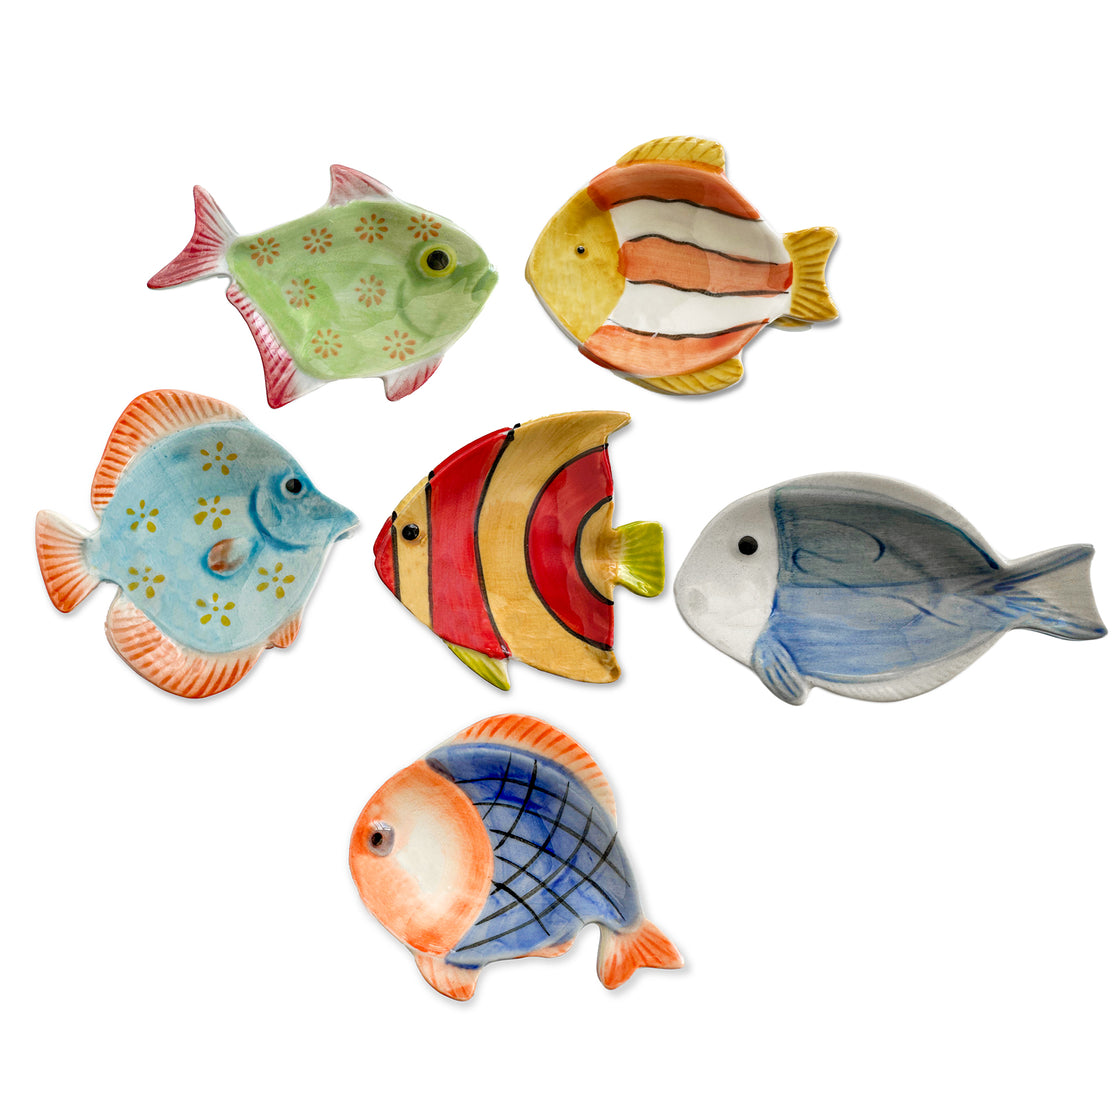  This set of six decorative tiny plates by rengora features charming, and colorful fish-shaped designs, adding a touch of whimsy and a splash of the sea to your table. 